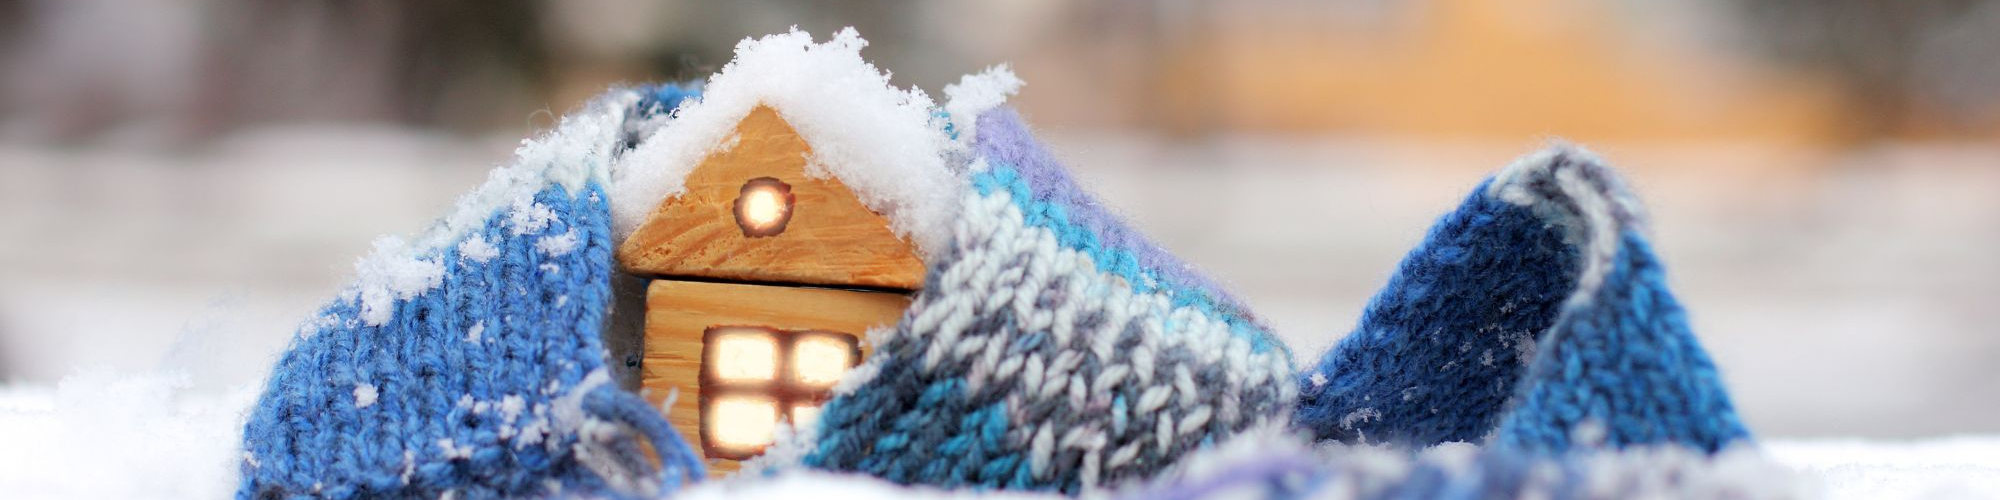 A small toy home with snow and a winter scarf around it